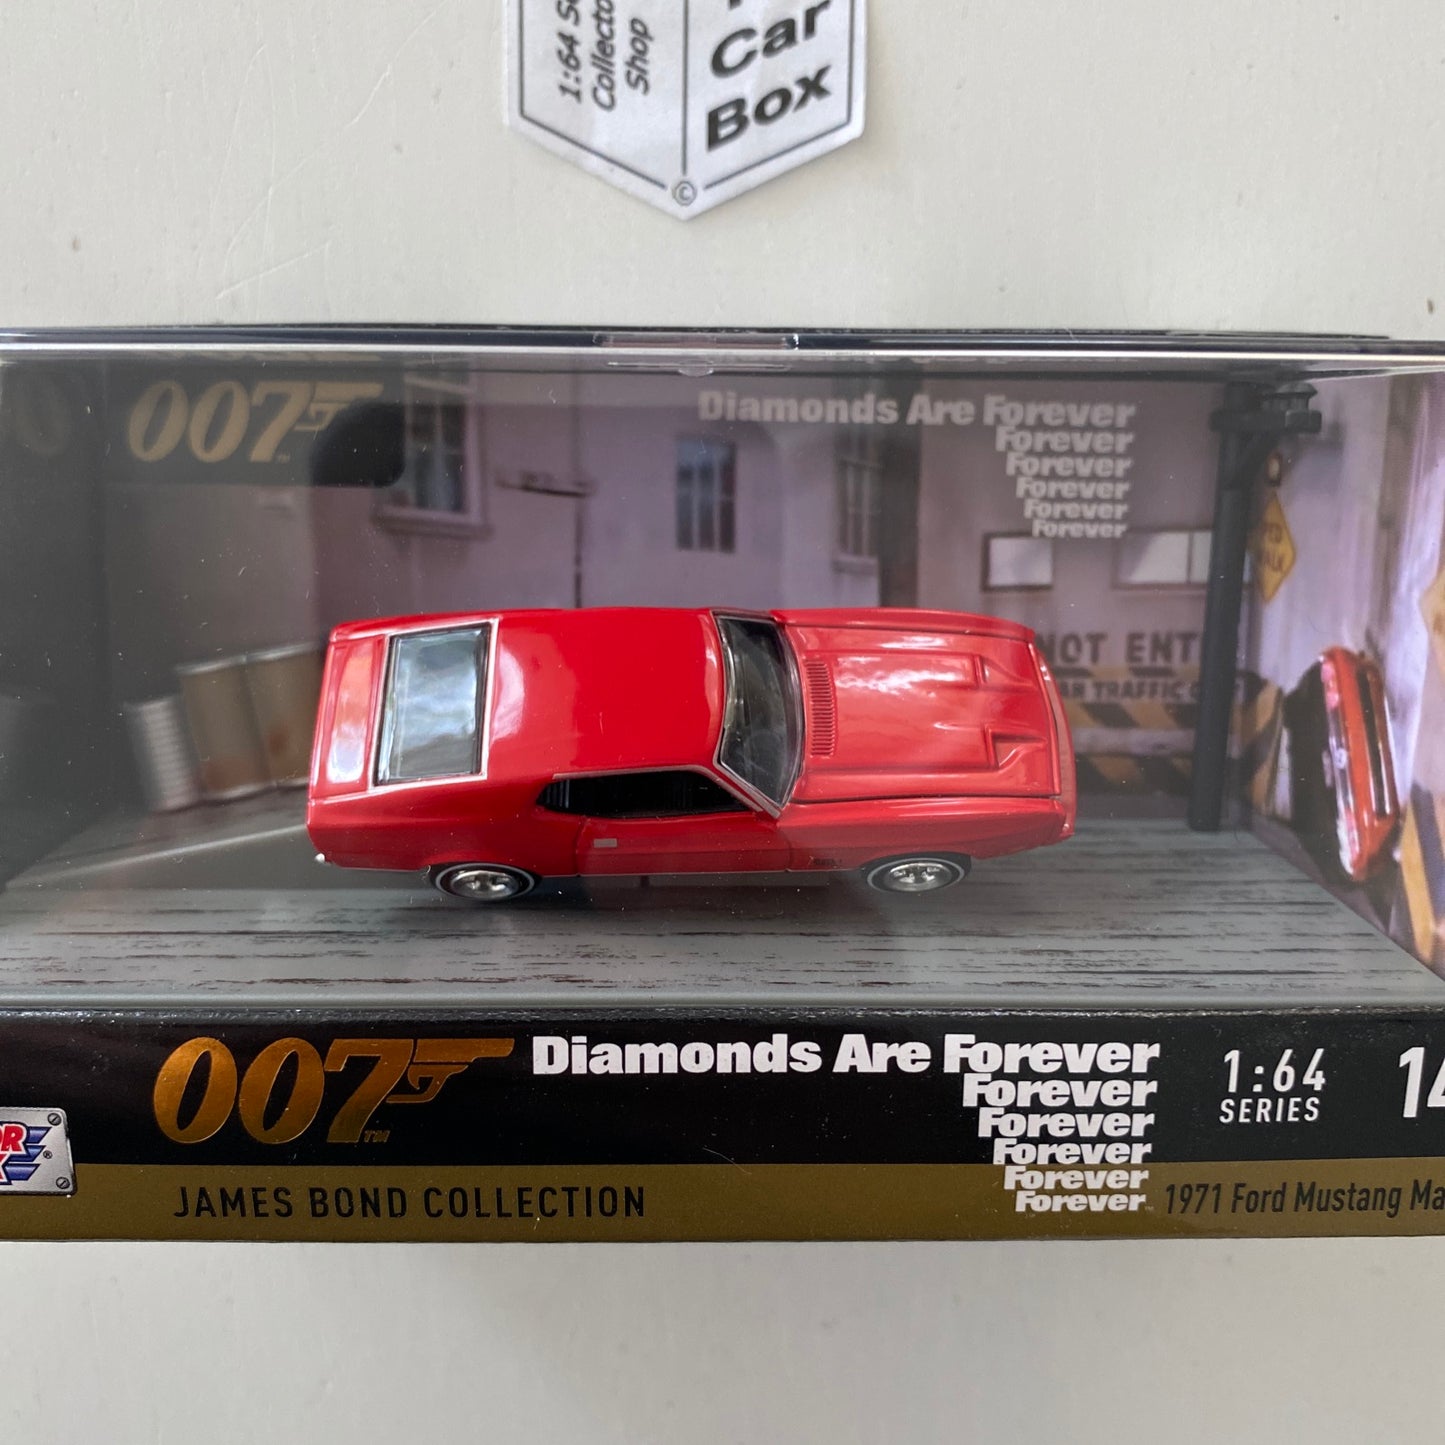 MOTOR MAX - 1971 Ford Mustang Mach 1 (1:64 007 Diamonds Are Forever Diorama) U99